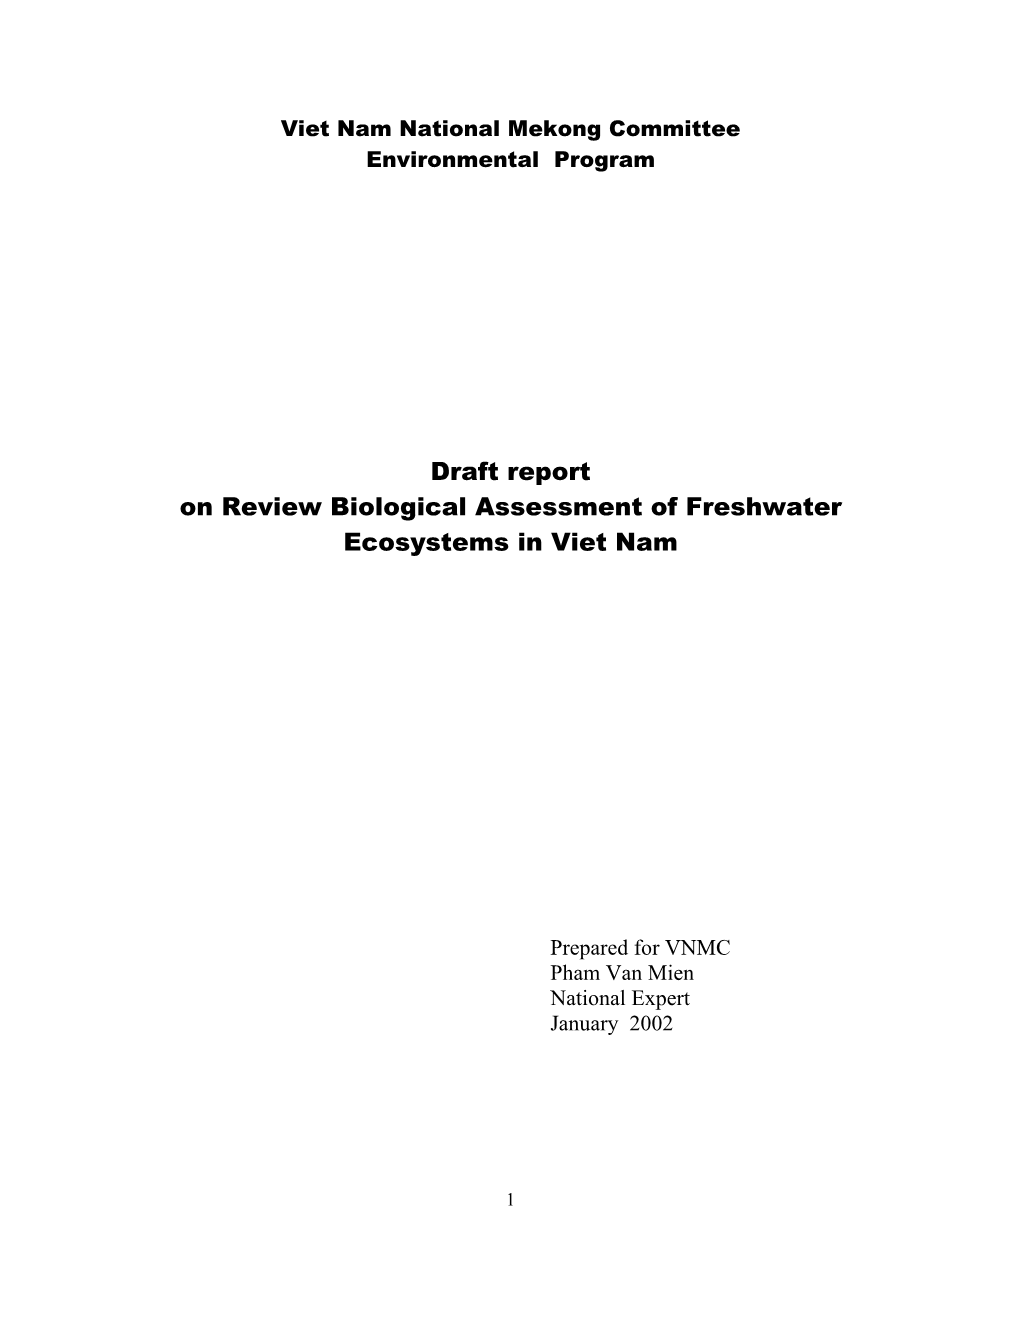 Draft Report on Review Biological Assessment of Freshwater Ecosystems in Viet Nam